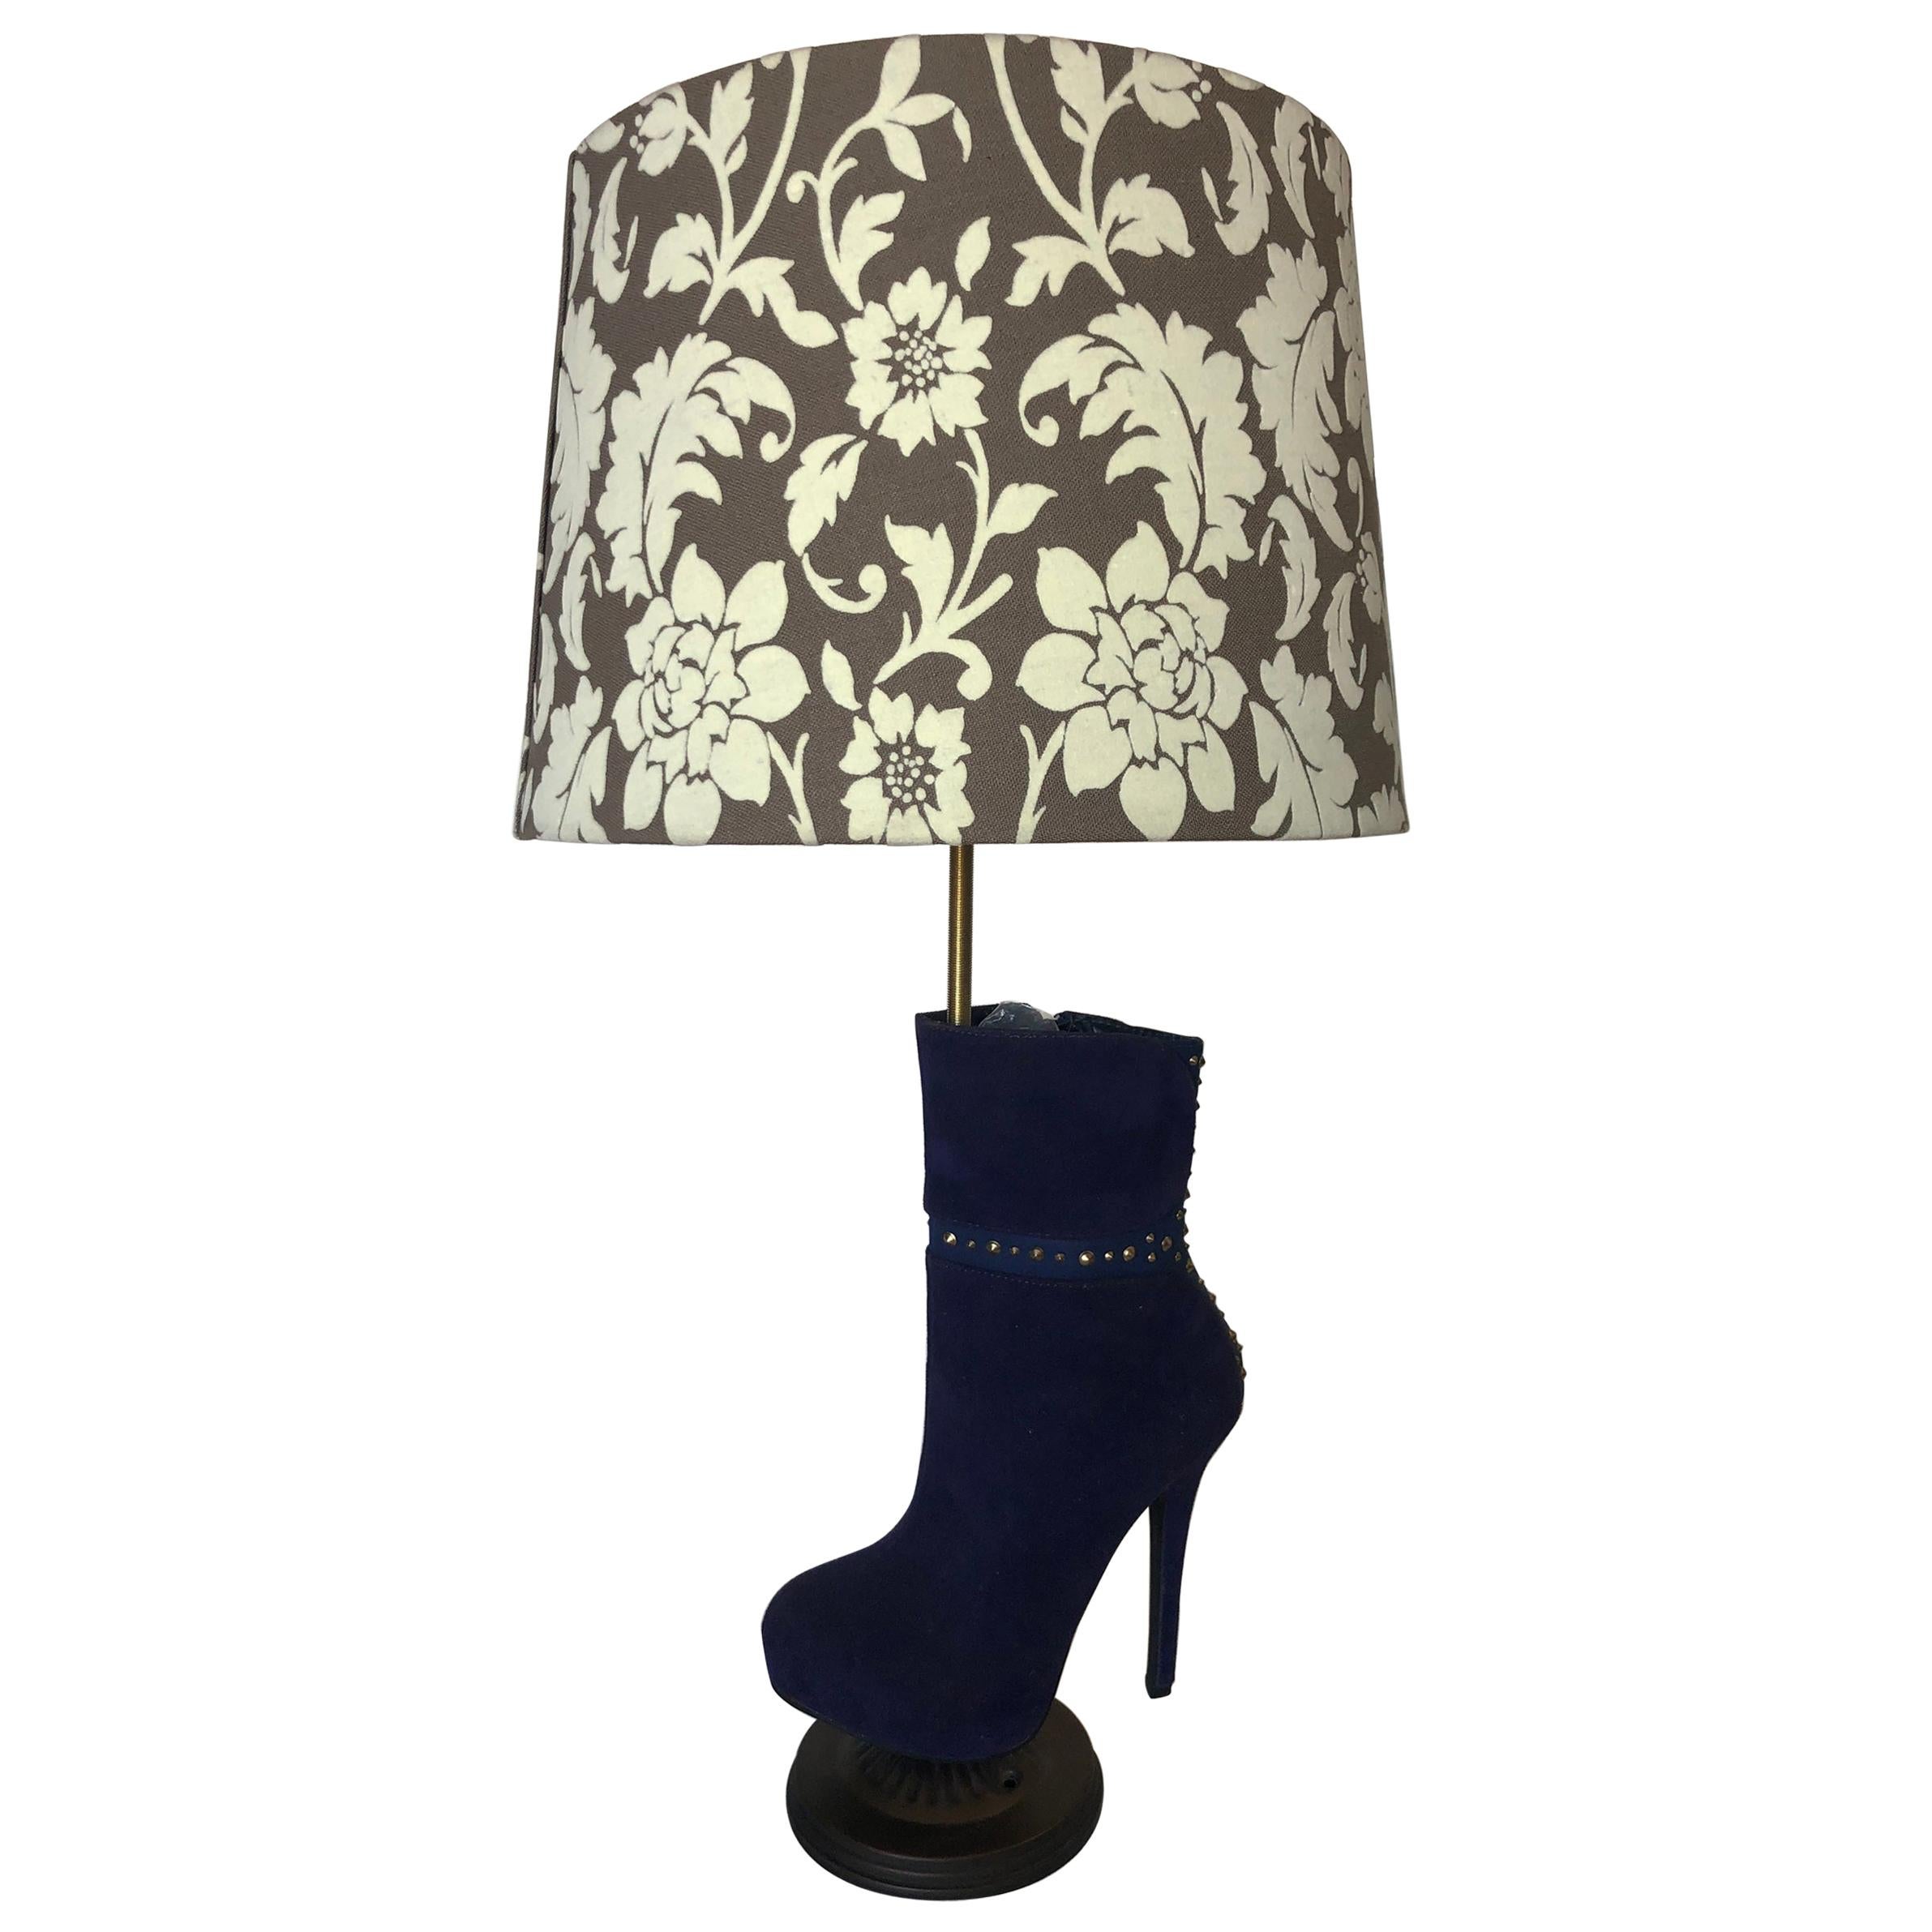 Purple Stiletto High Heel Boot Table Lamp with Floral Lamp Shade